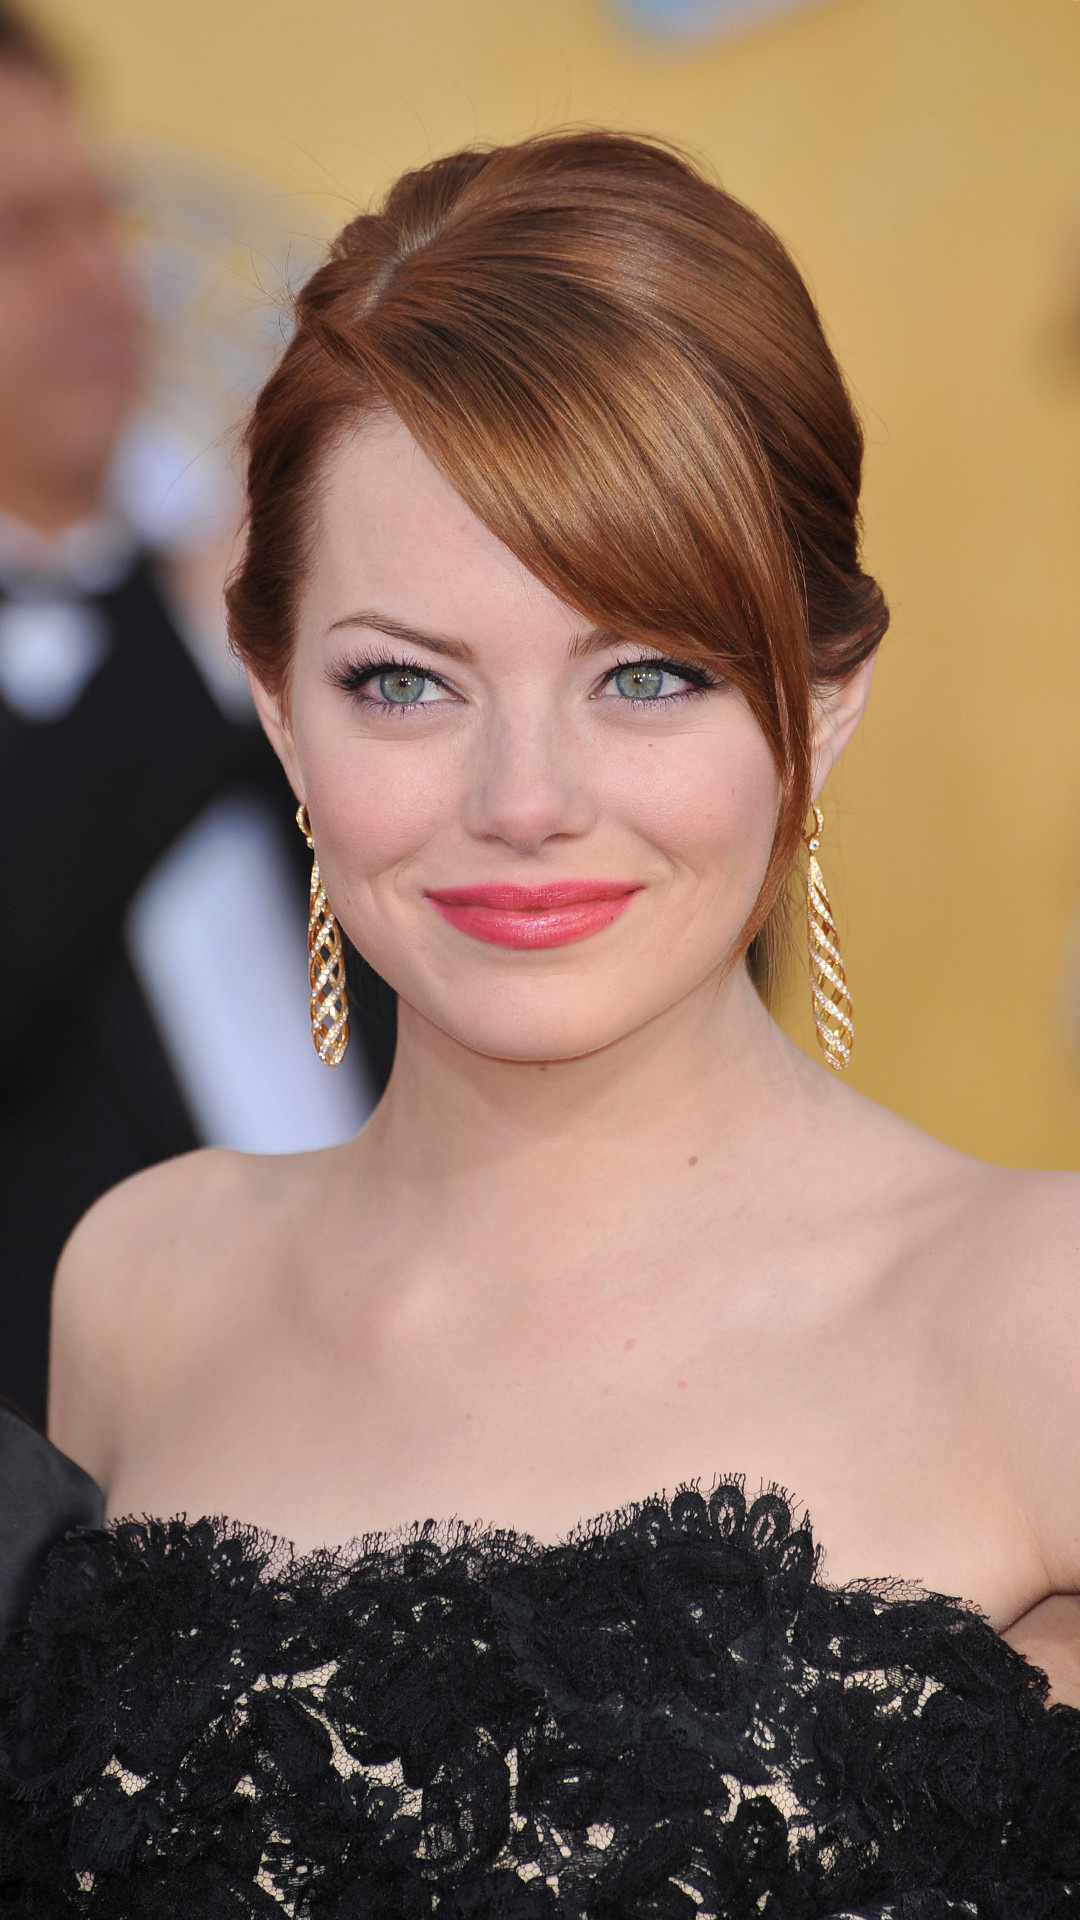 Emma Stone movies, Mobile wallpapers, High-resolution images, Celebrity charm, 1080x1920 Full HD Phone